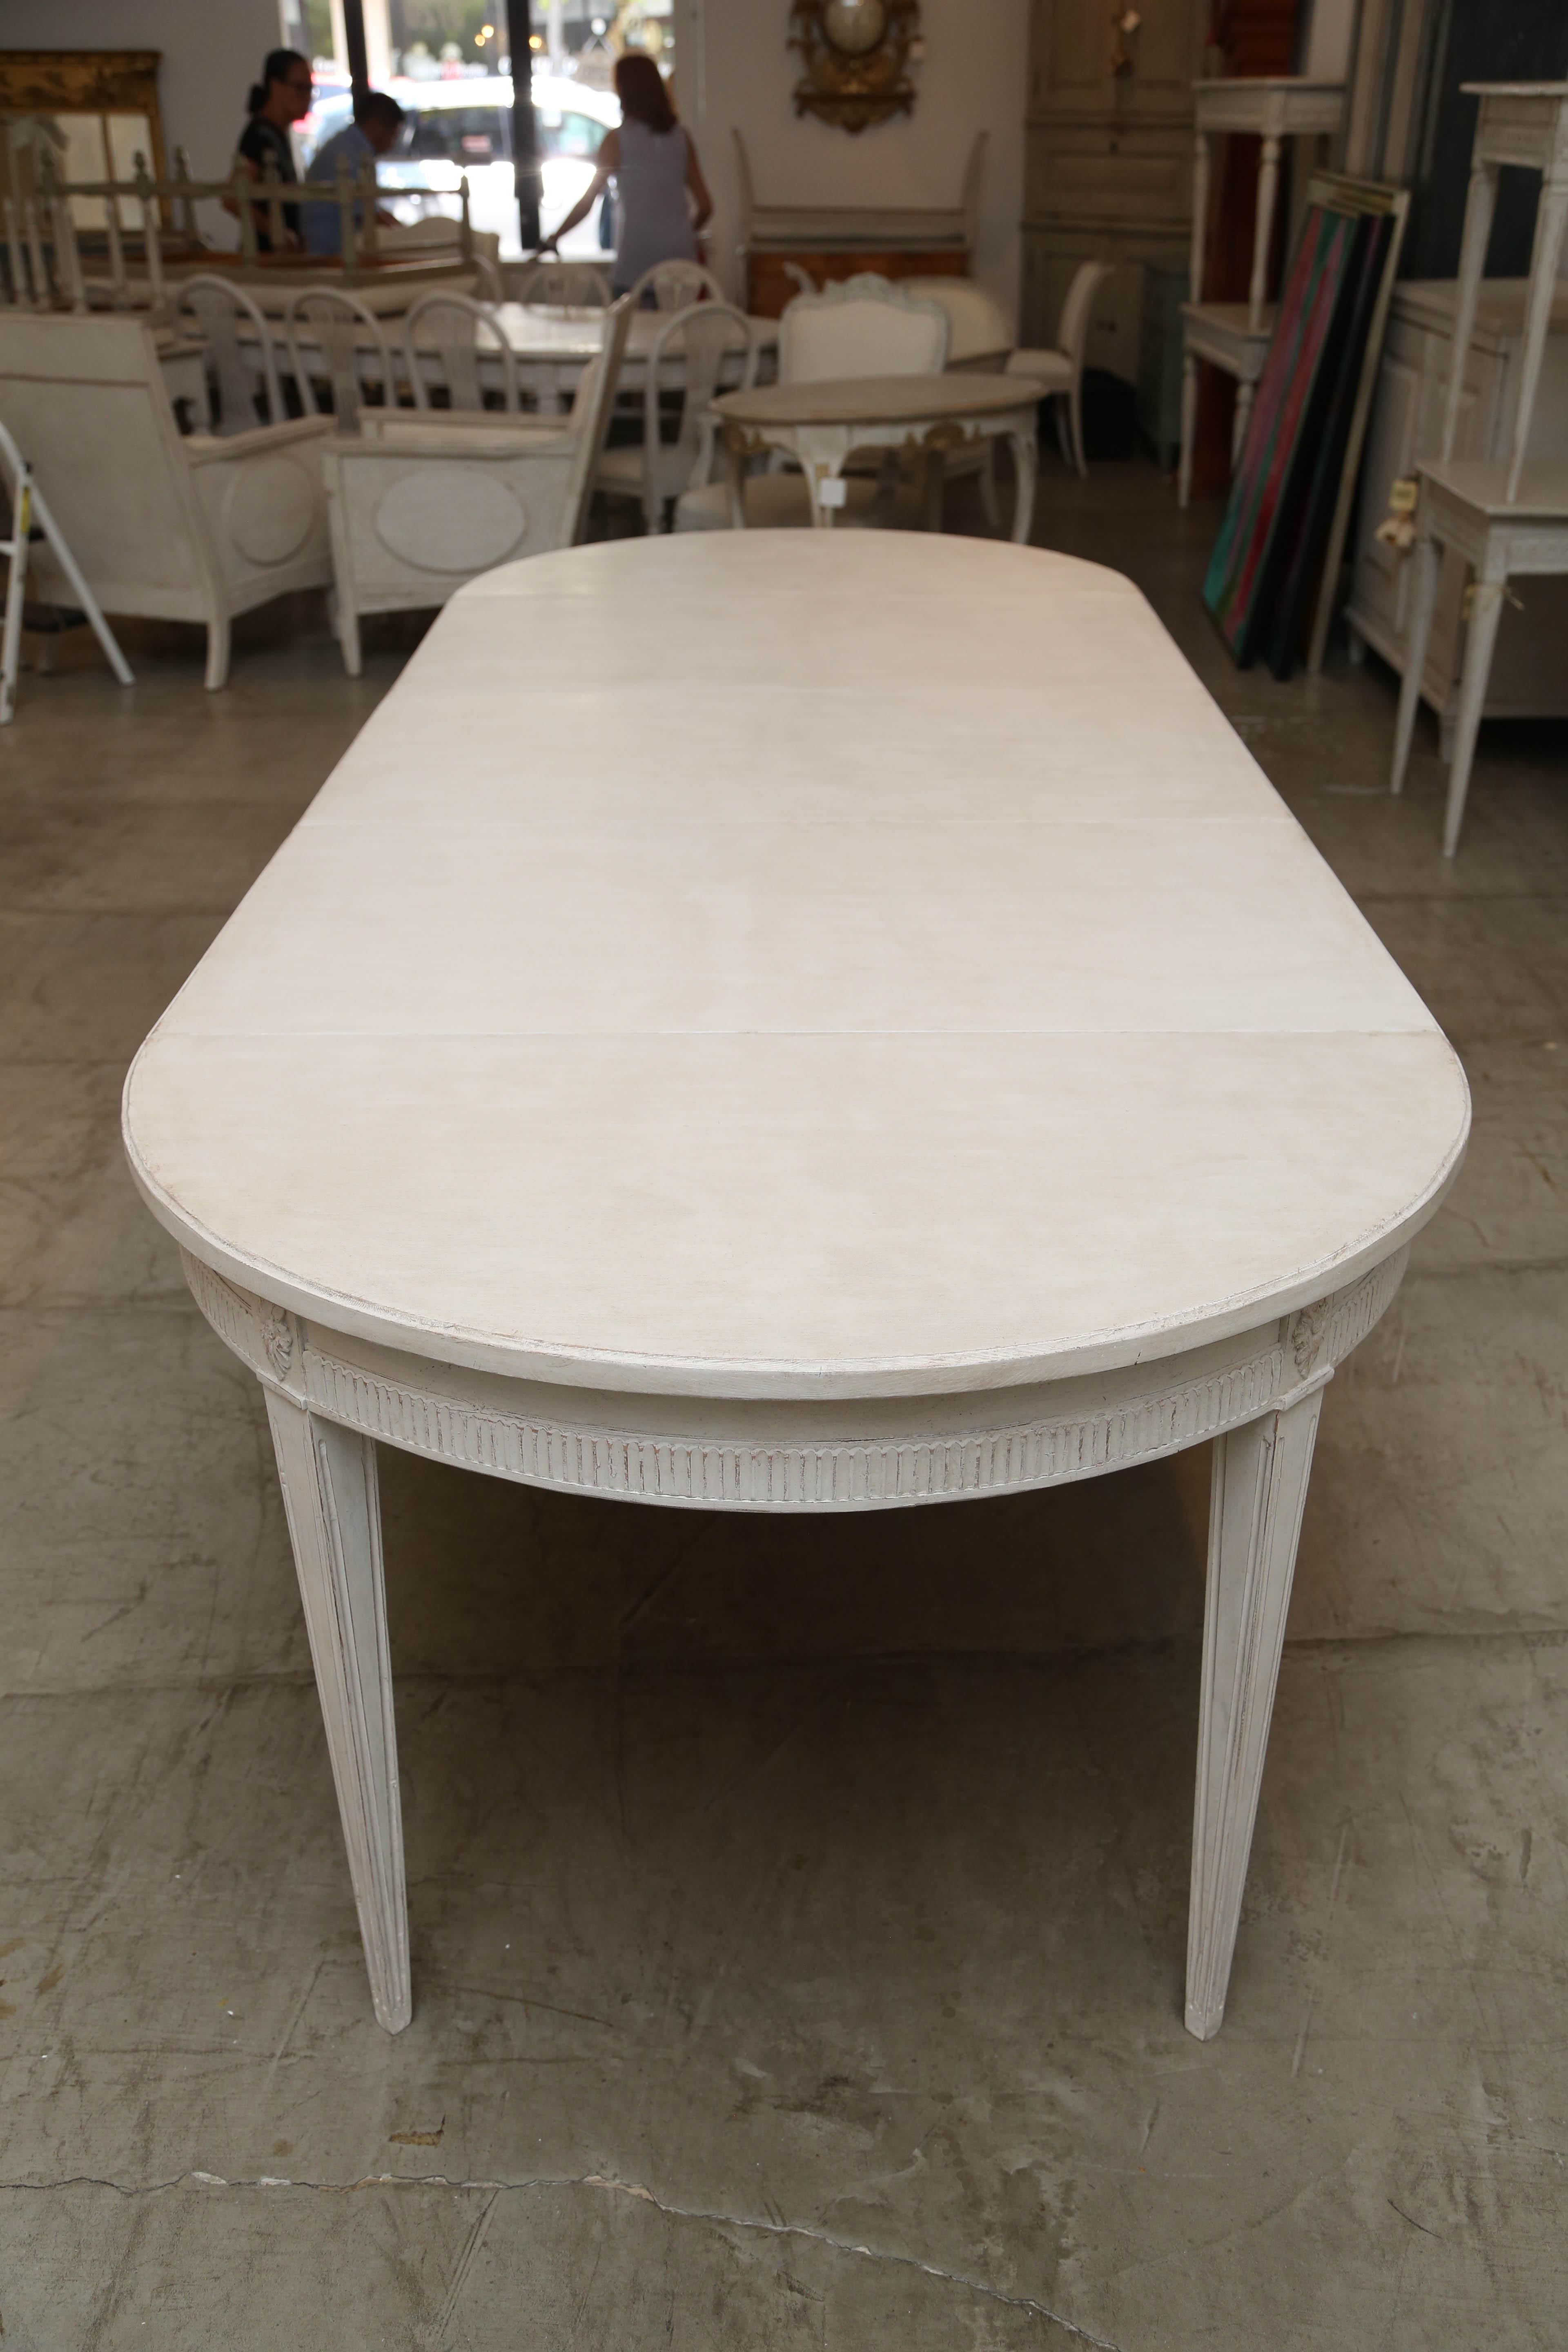 Antique Swedish dining table with three leaves of later date. Painted a distressed Swedish white with grayish highlight finish, has four tapered fluted legs and one center support leg. Carved rosette on the top of each leg. The table is very sturdy